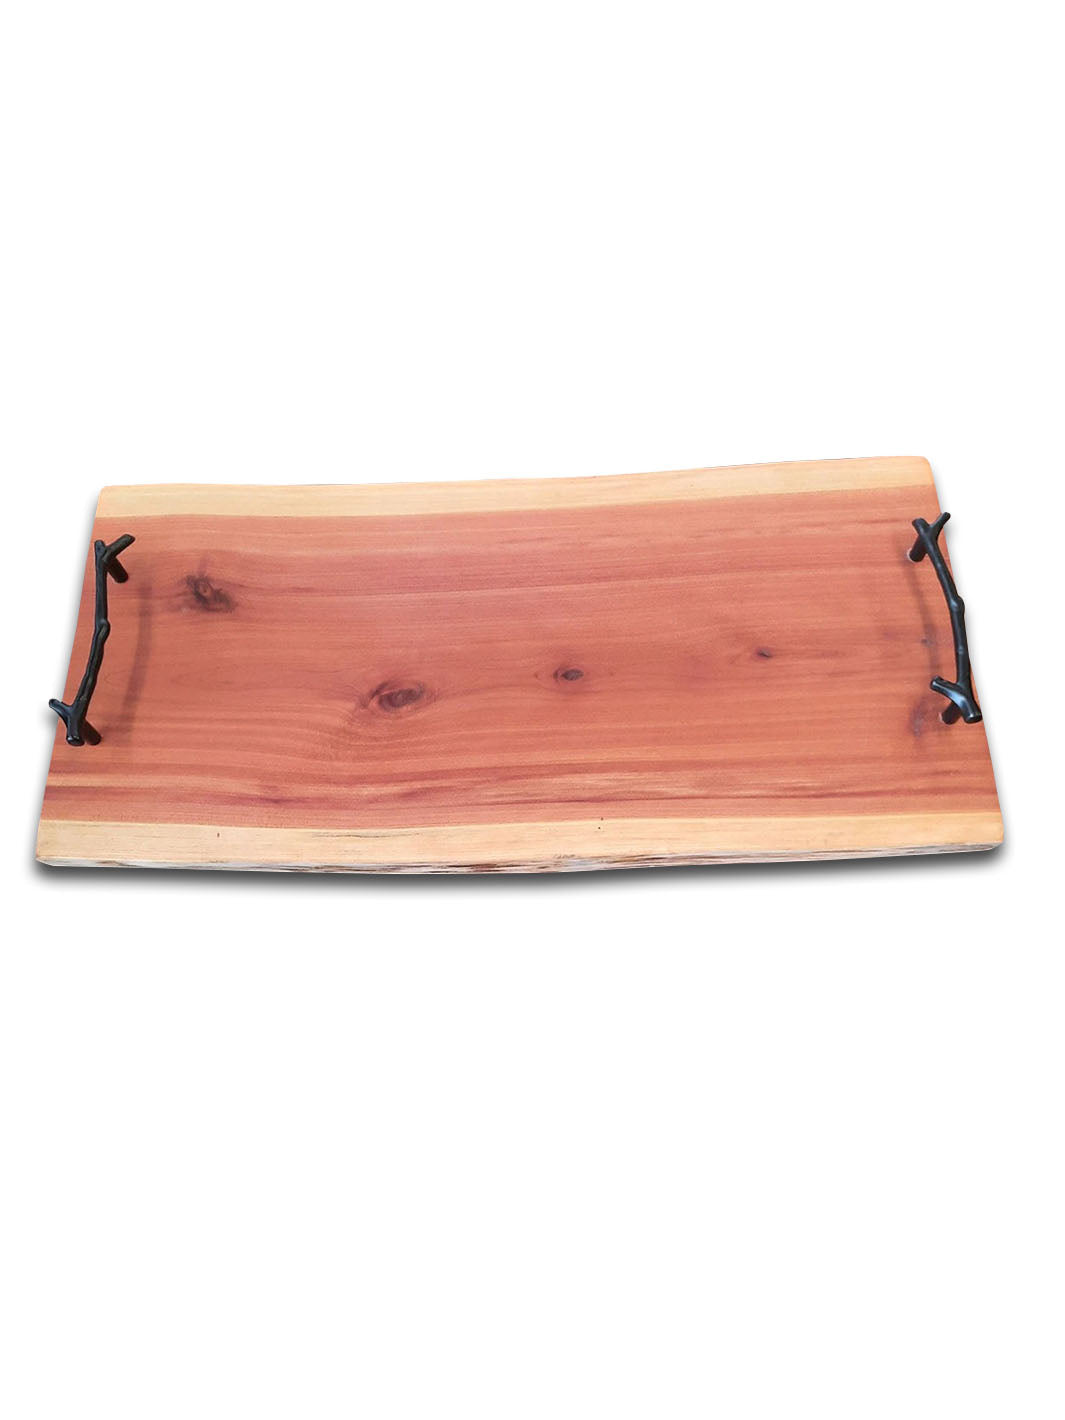 Handcrafted Large Red Cedar Live Edge Charcuterie Board DaddyO's Cutting Boards DAD0156